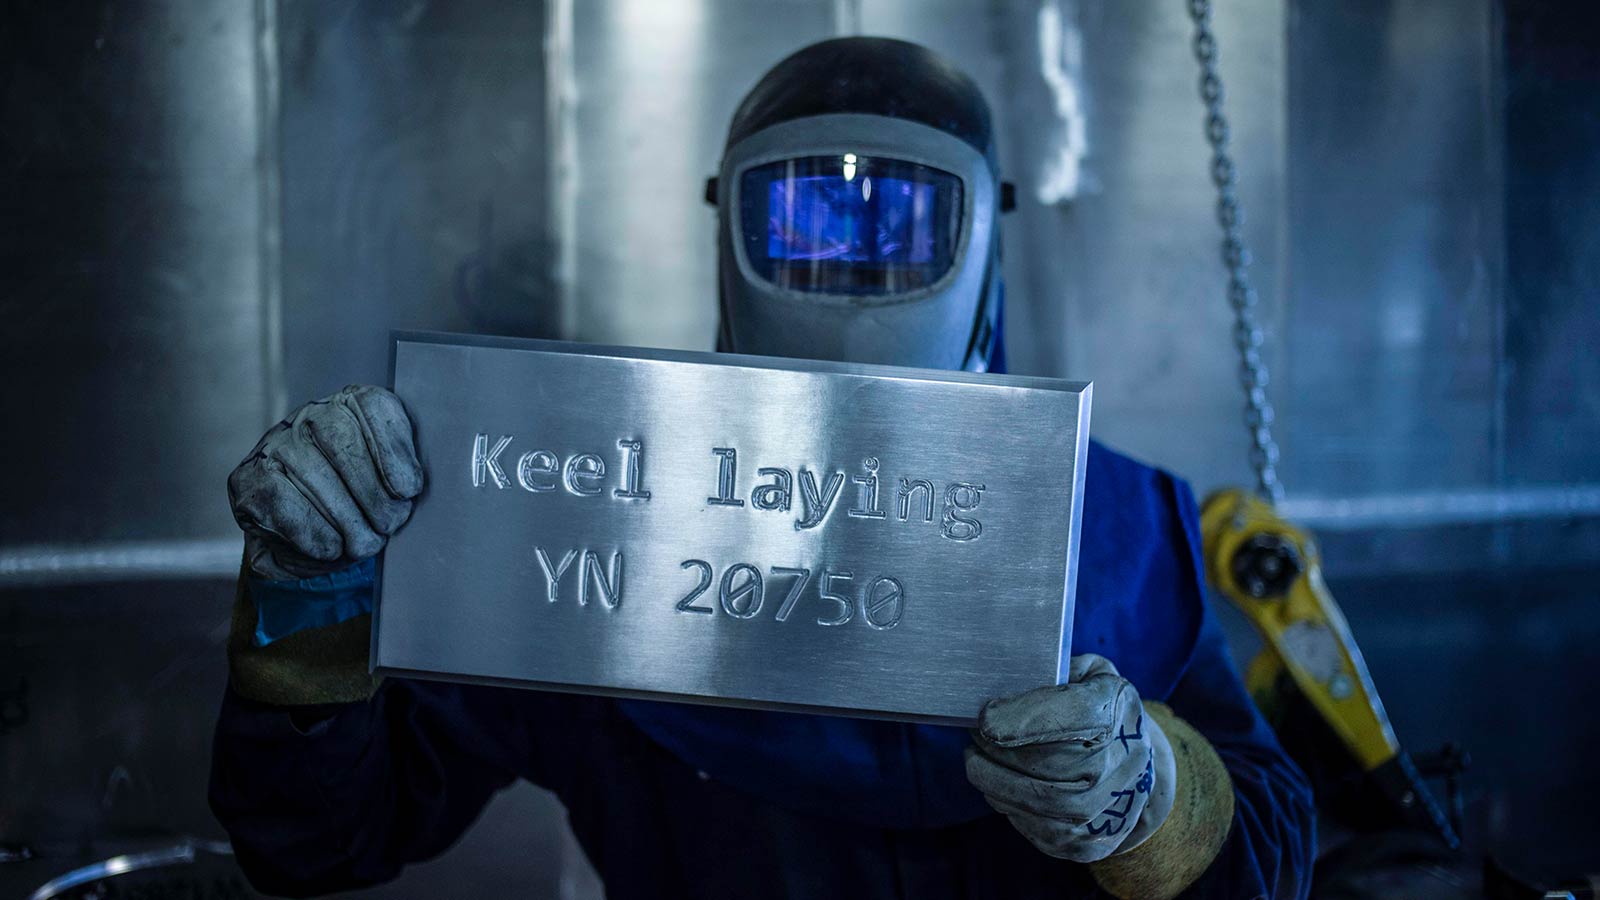 A new star is born: YN 20750 Project Orion keel laying announcement - Heesen Yachts